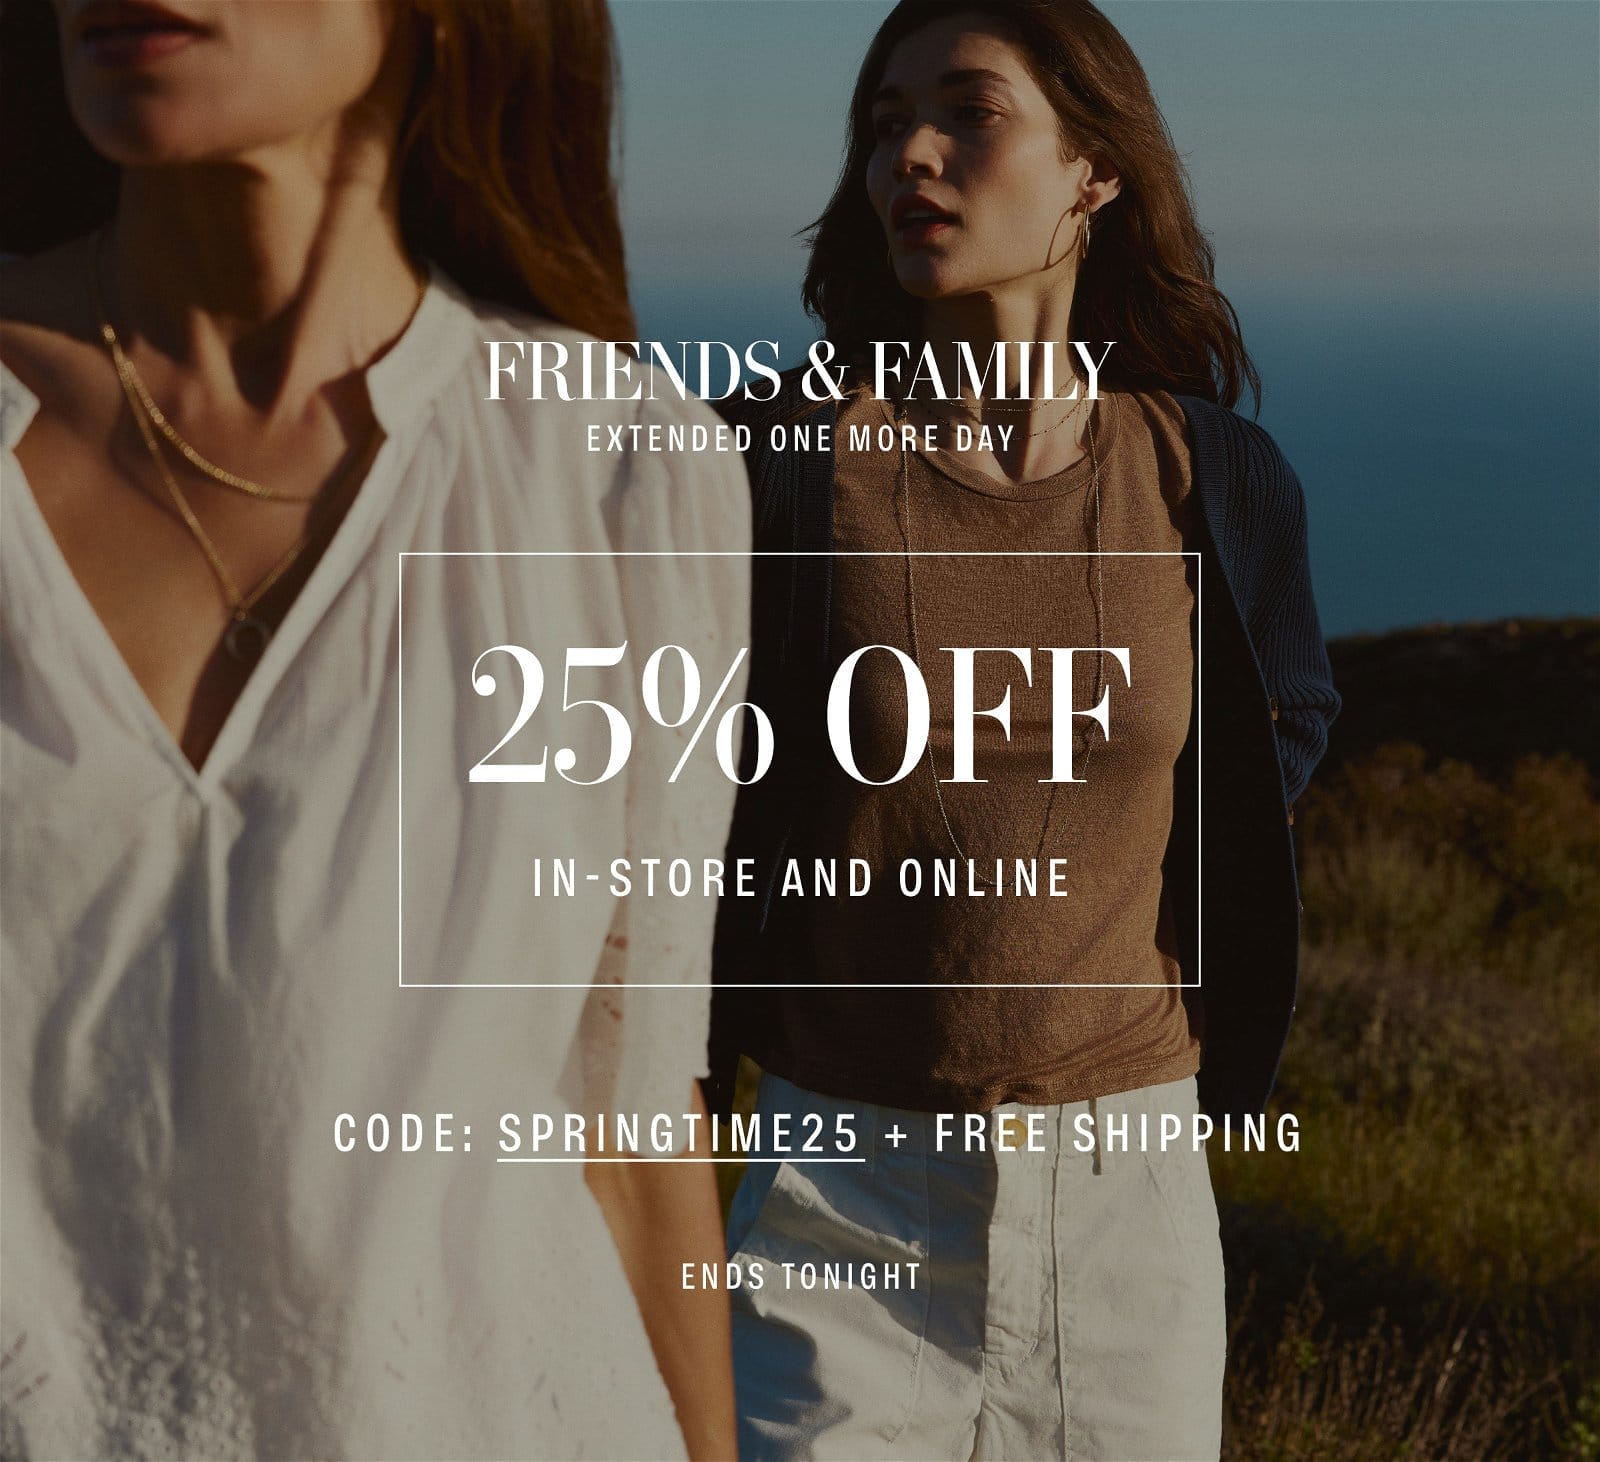 FRIENDS & FAMILY! EXTENDED ONE MORE DAY. 25% OFF IN-STORE AND ONLINE. CODE: SPRINGTIME25 + FREE SHIPPING. ENDS TONIGHT